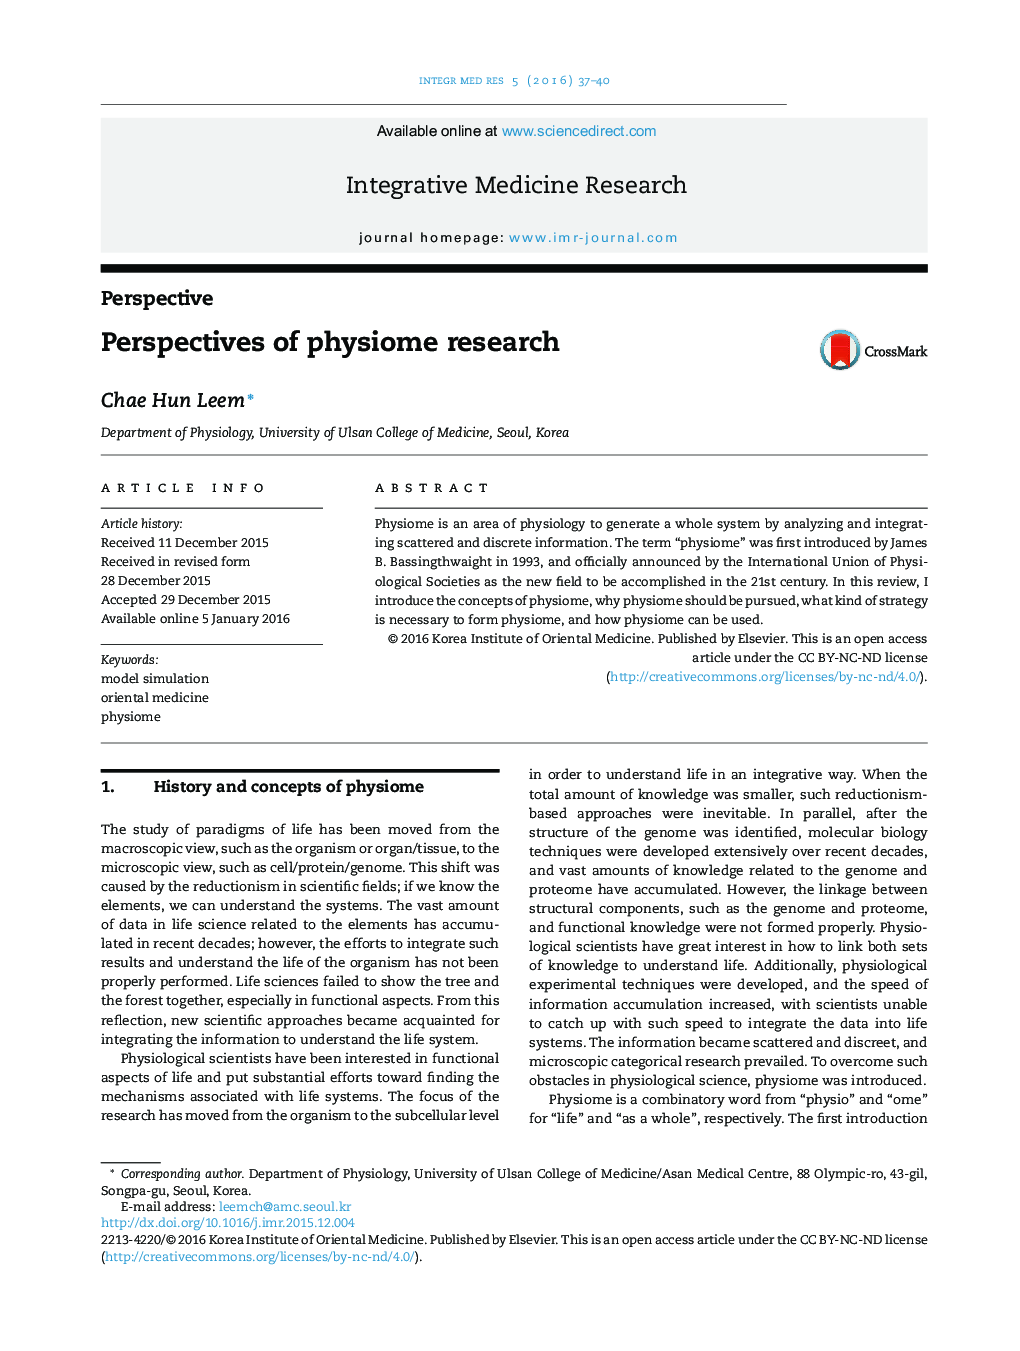 Perspectives of physiome research